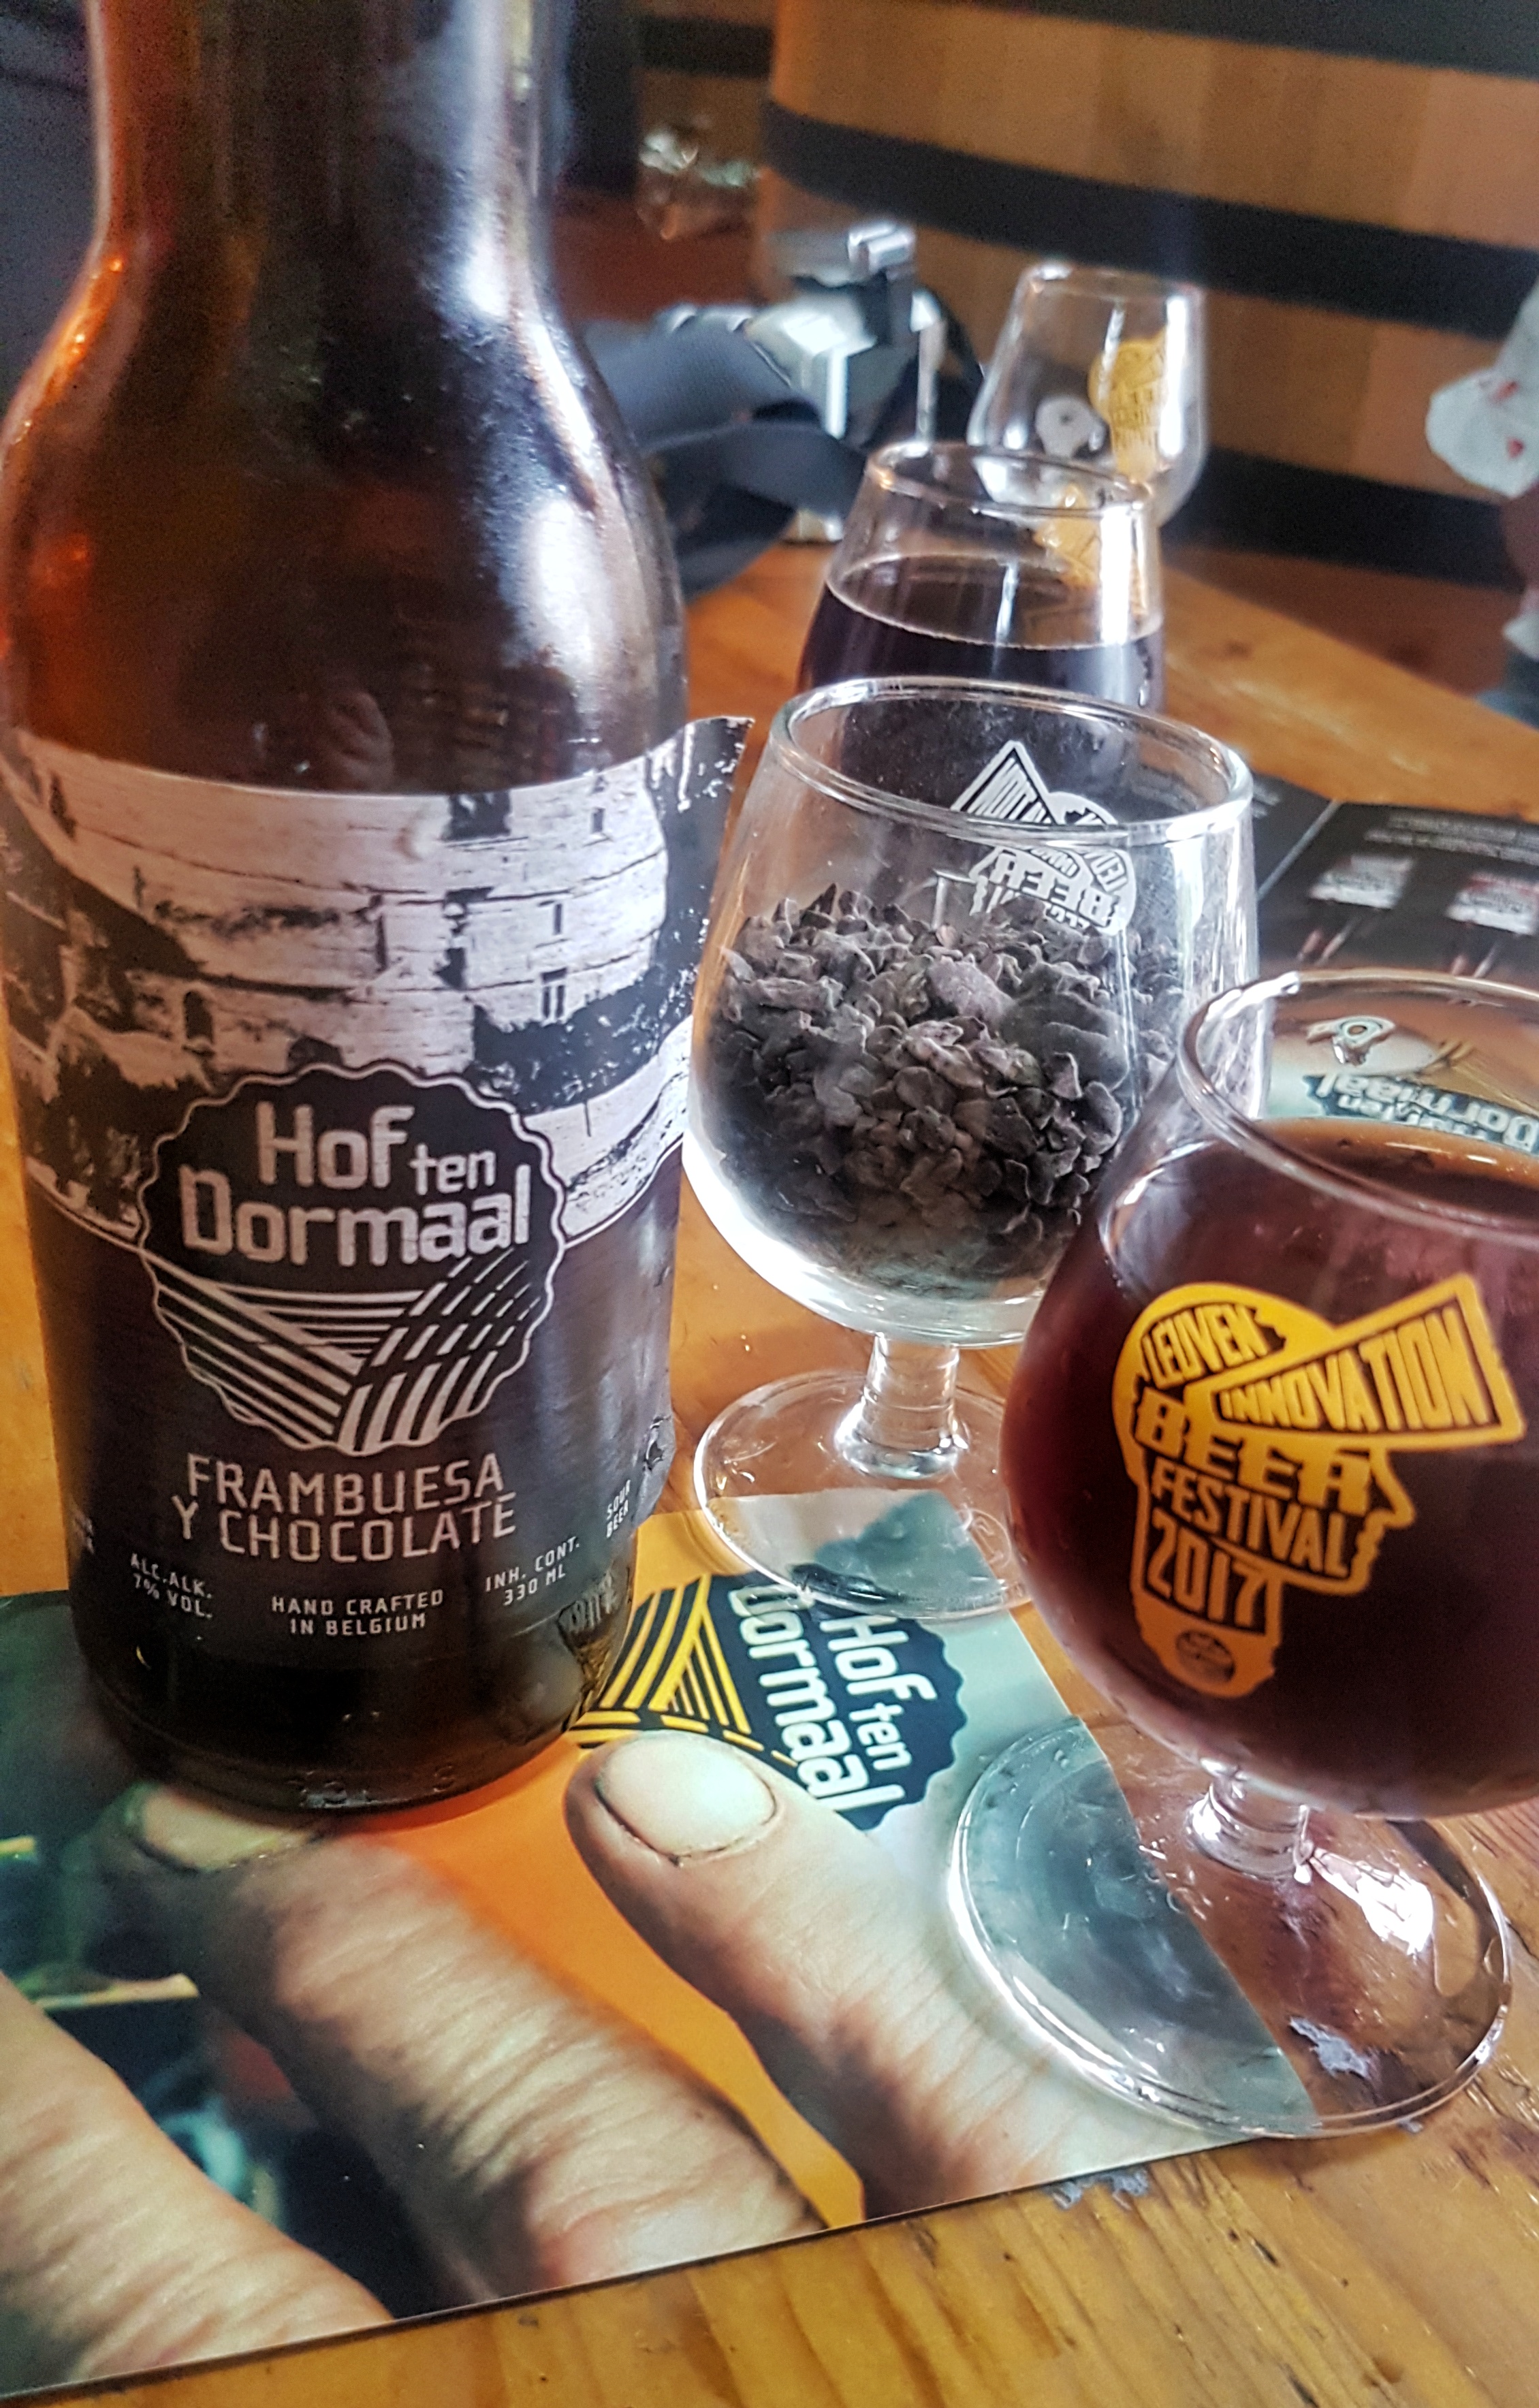 Hof brewery tour in Leuven - tasting the chocolate beer, read more about what you can do in Leuven in 48 hours at www.whatsupcourtney.com #Leuven #travel #travelguide